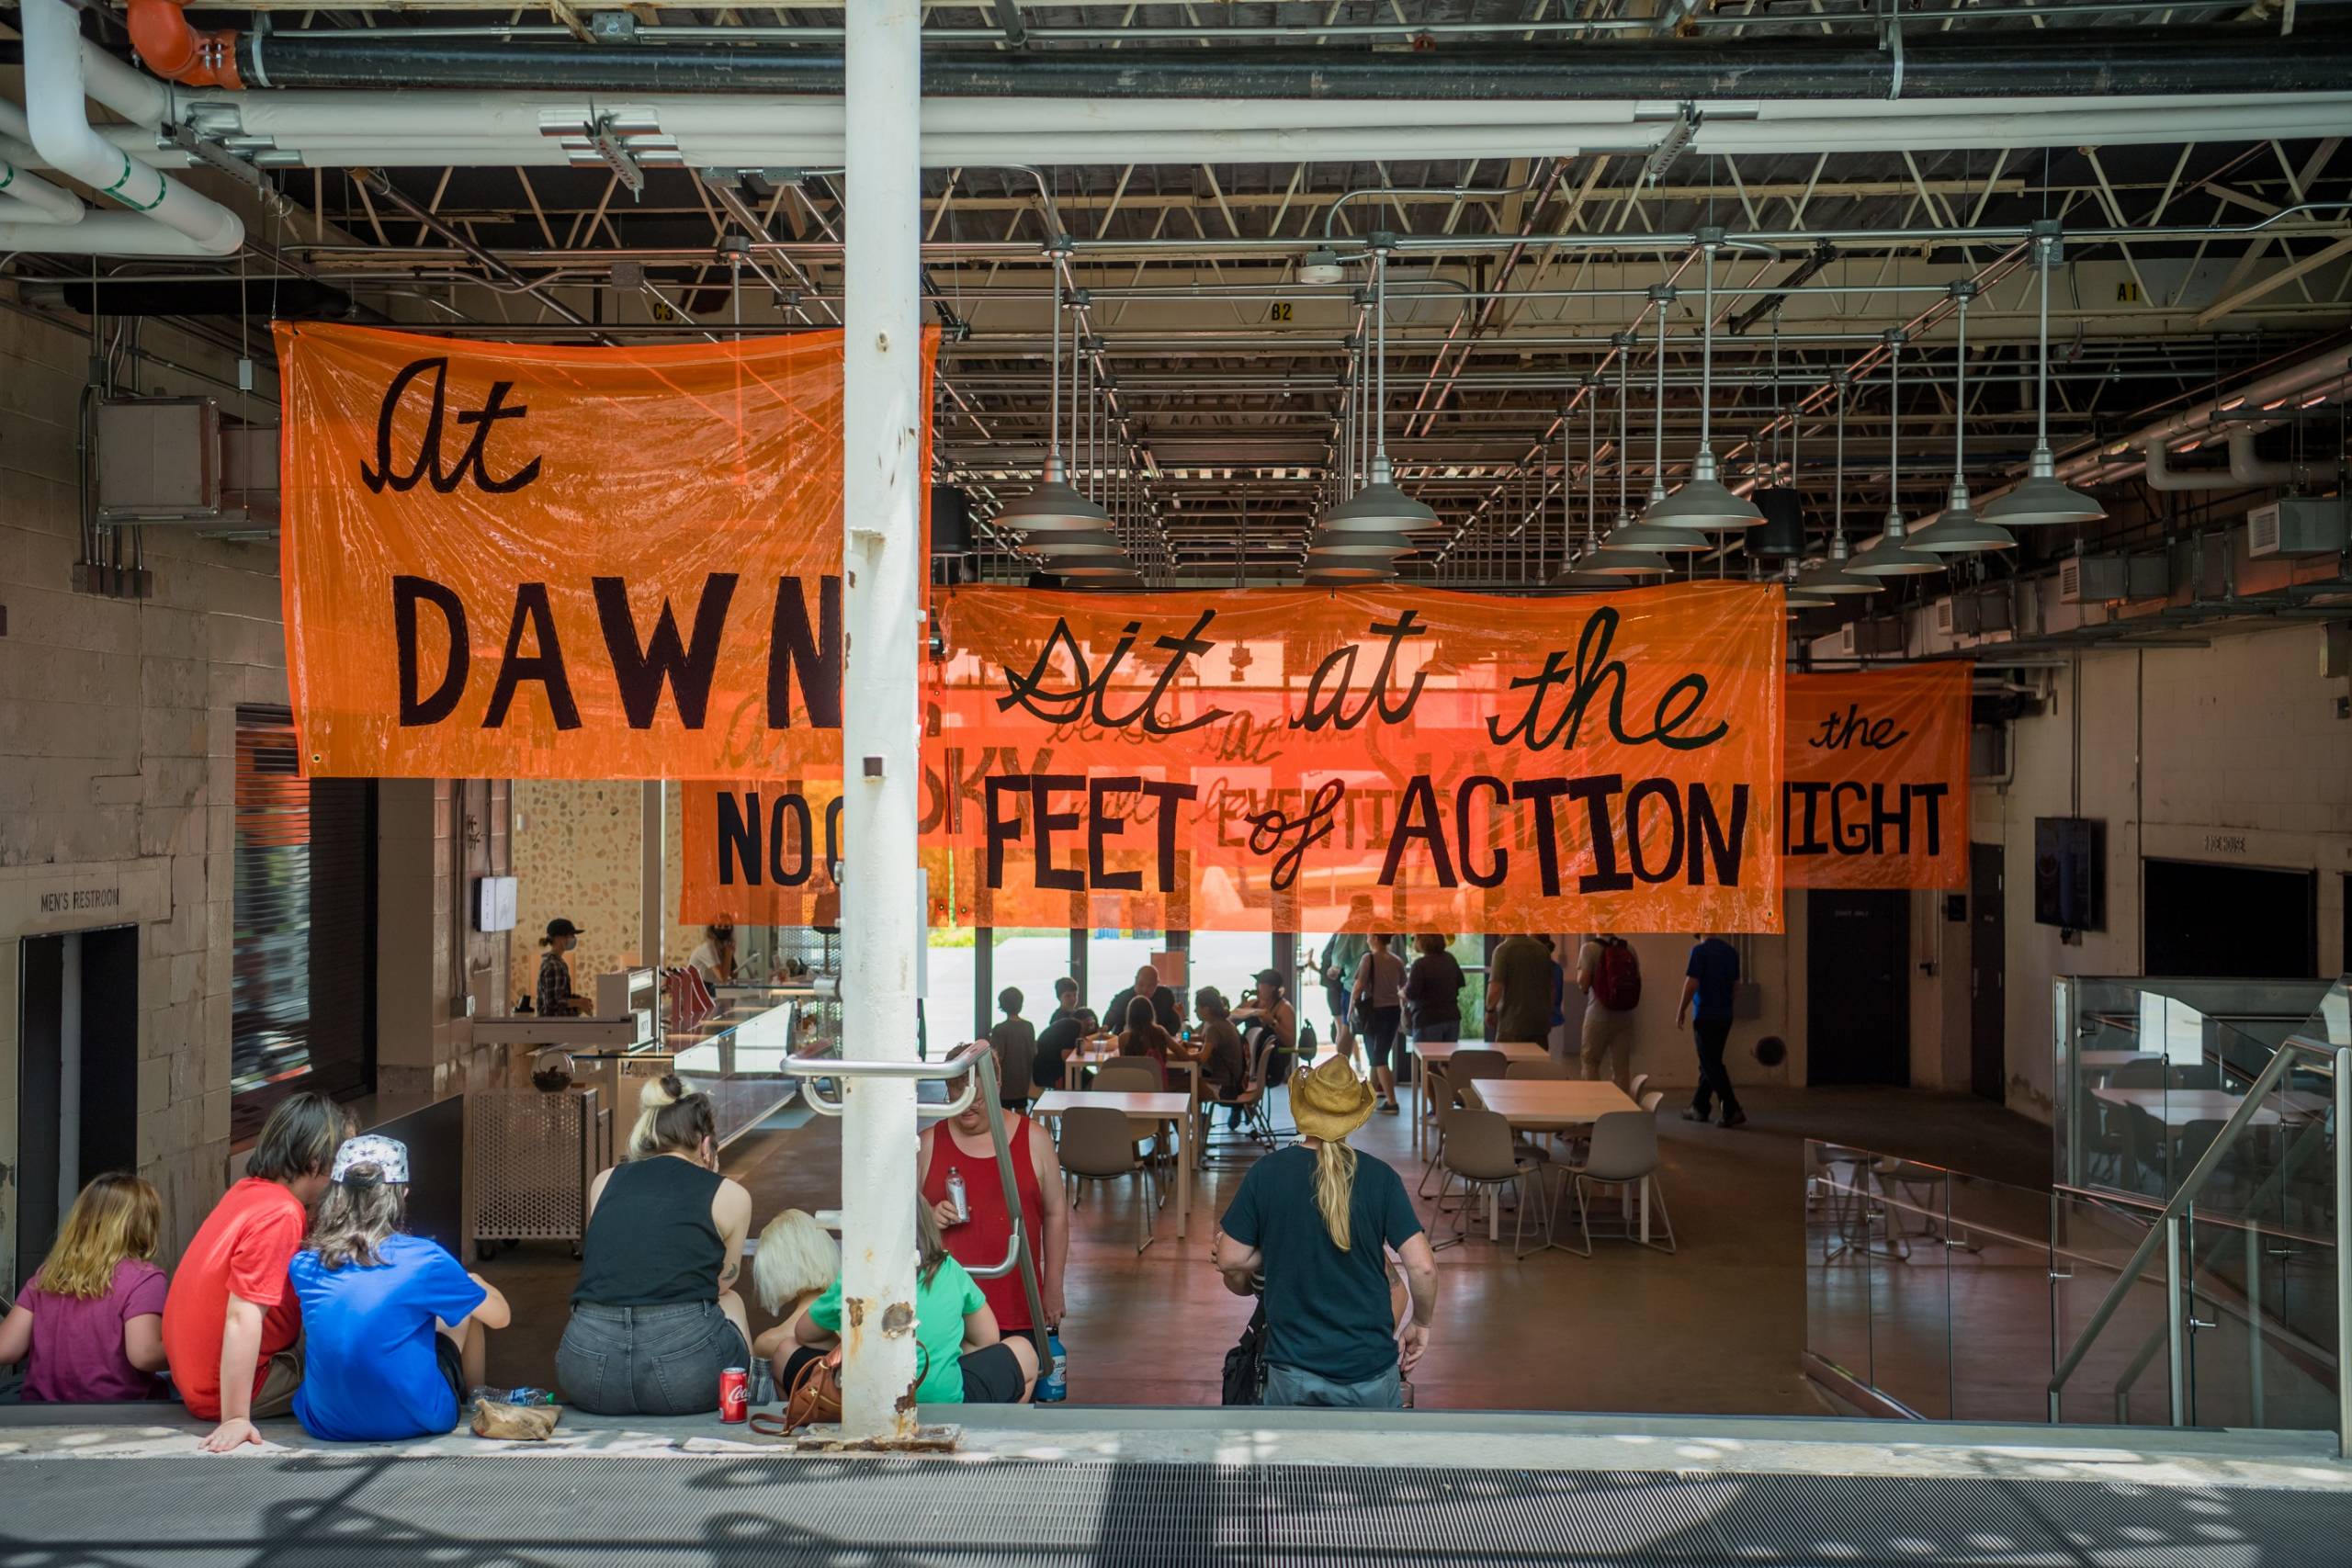 People sitting on steps inside with large orange banners overhead with words and phrases written in black